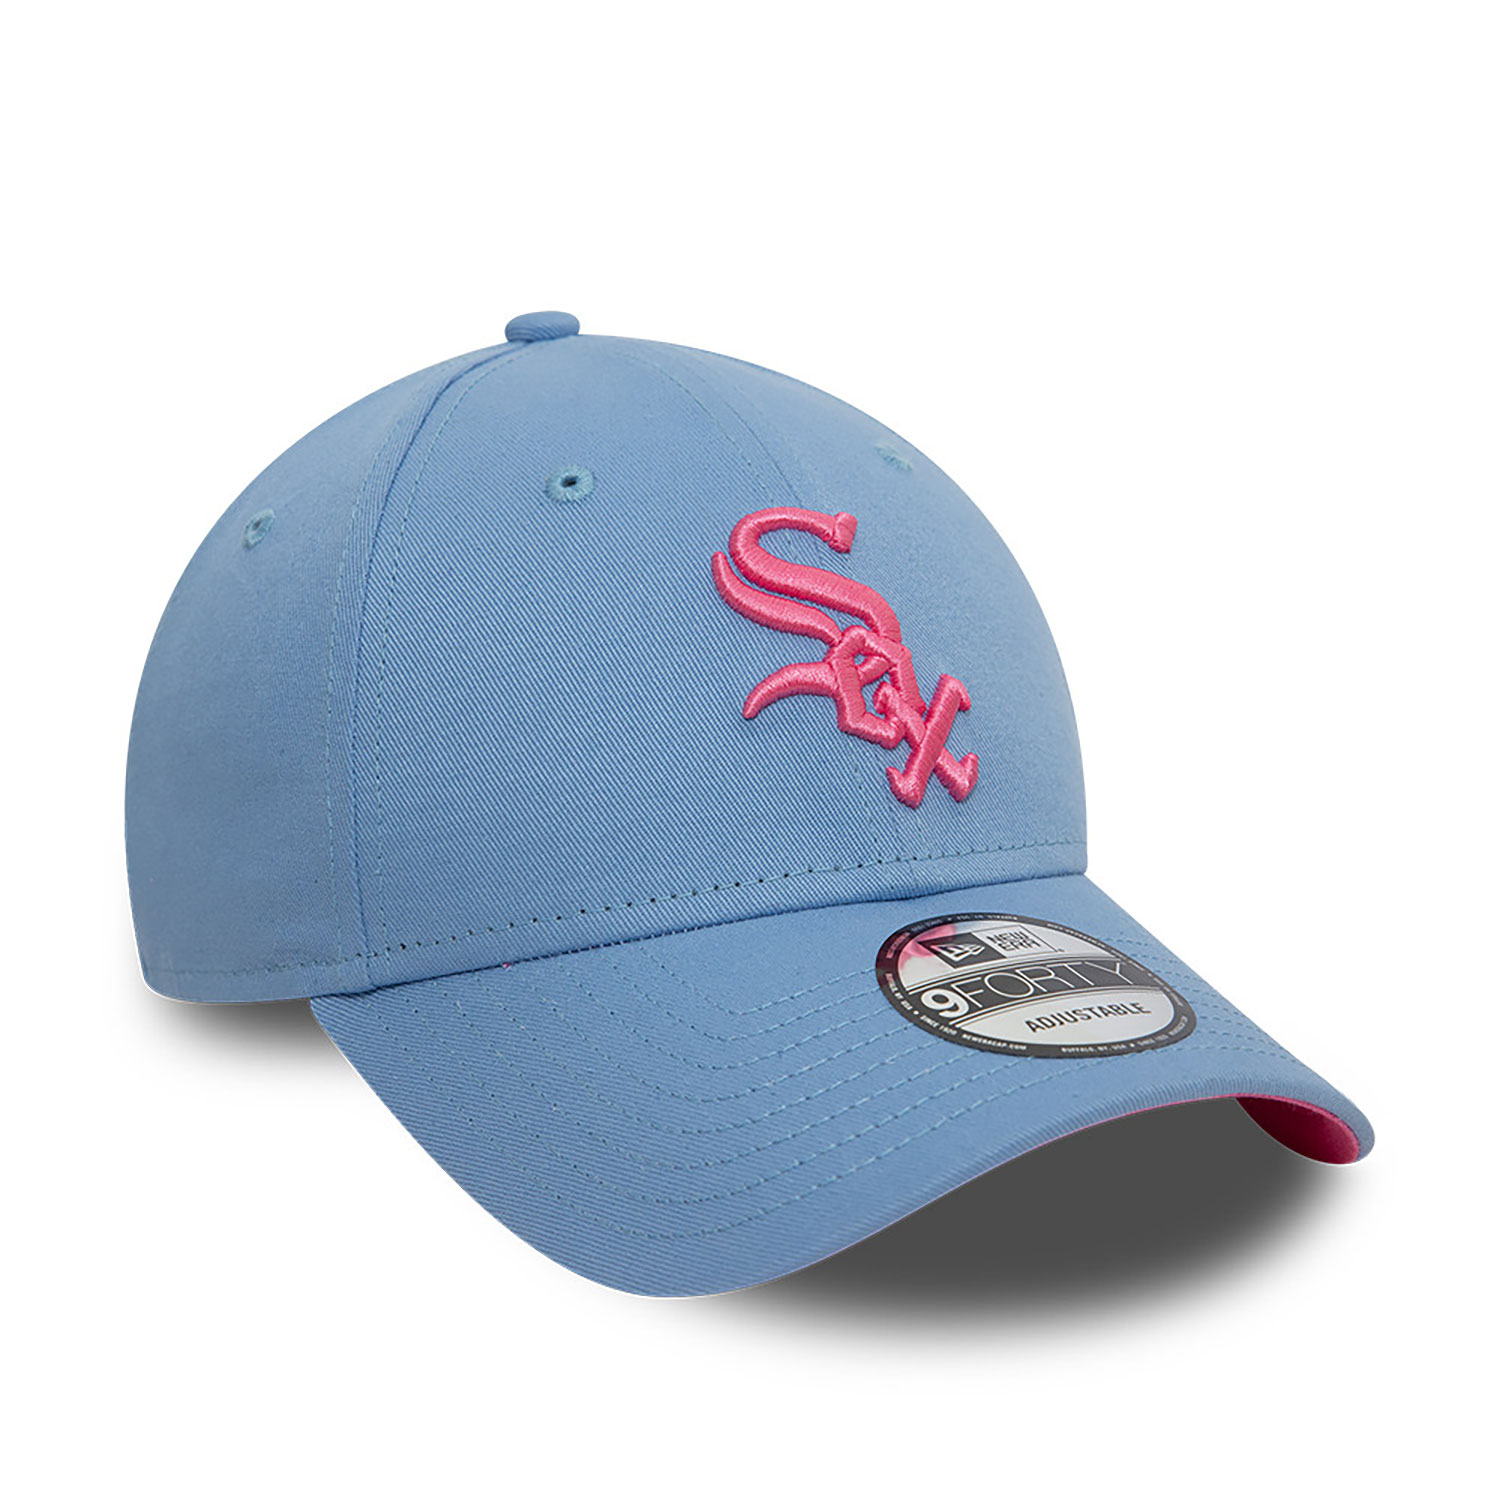 Chicago White Sox Bright Pop Pastel Blue 9FORTY Adjustable Cap